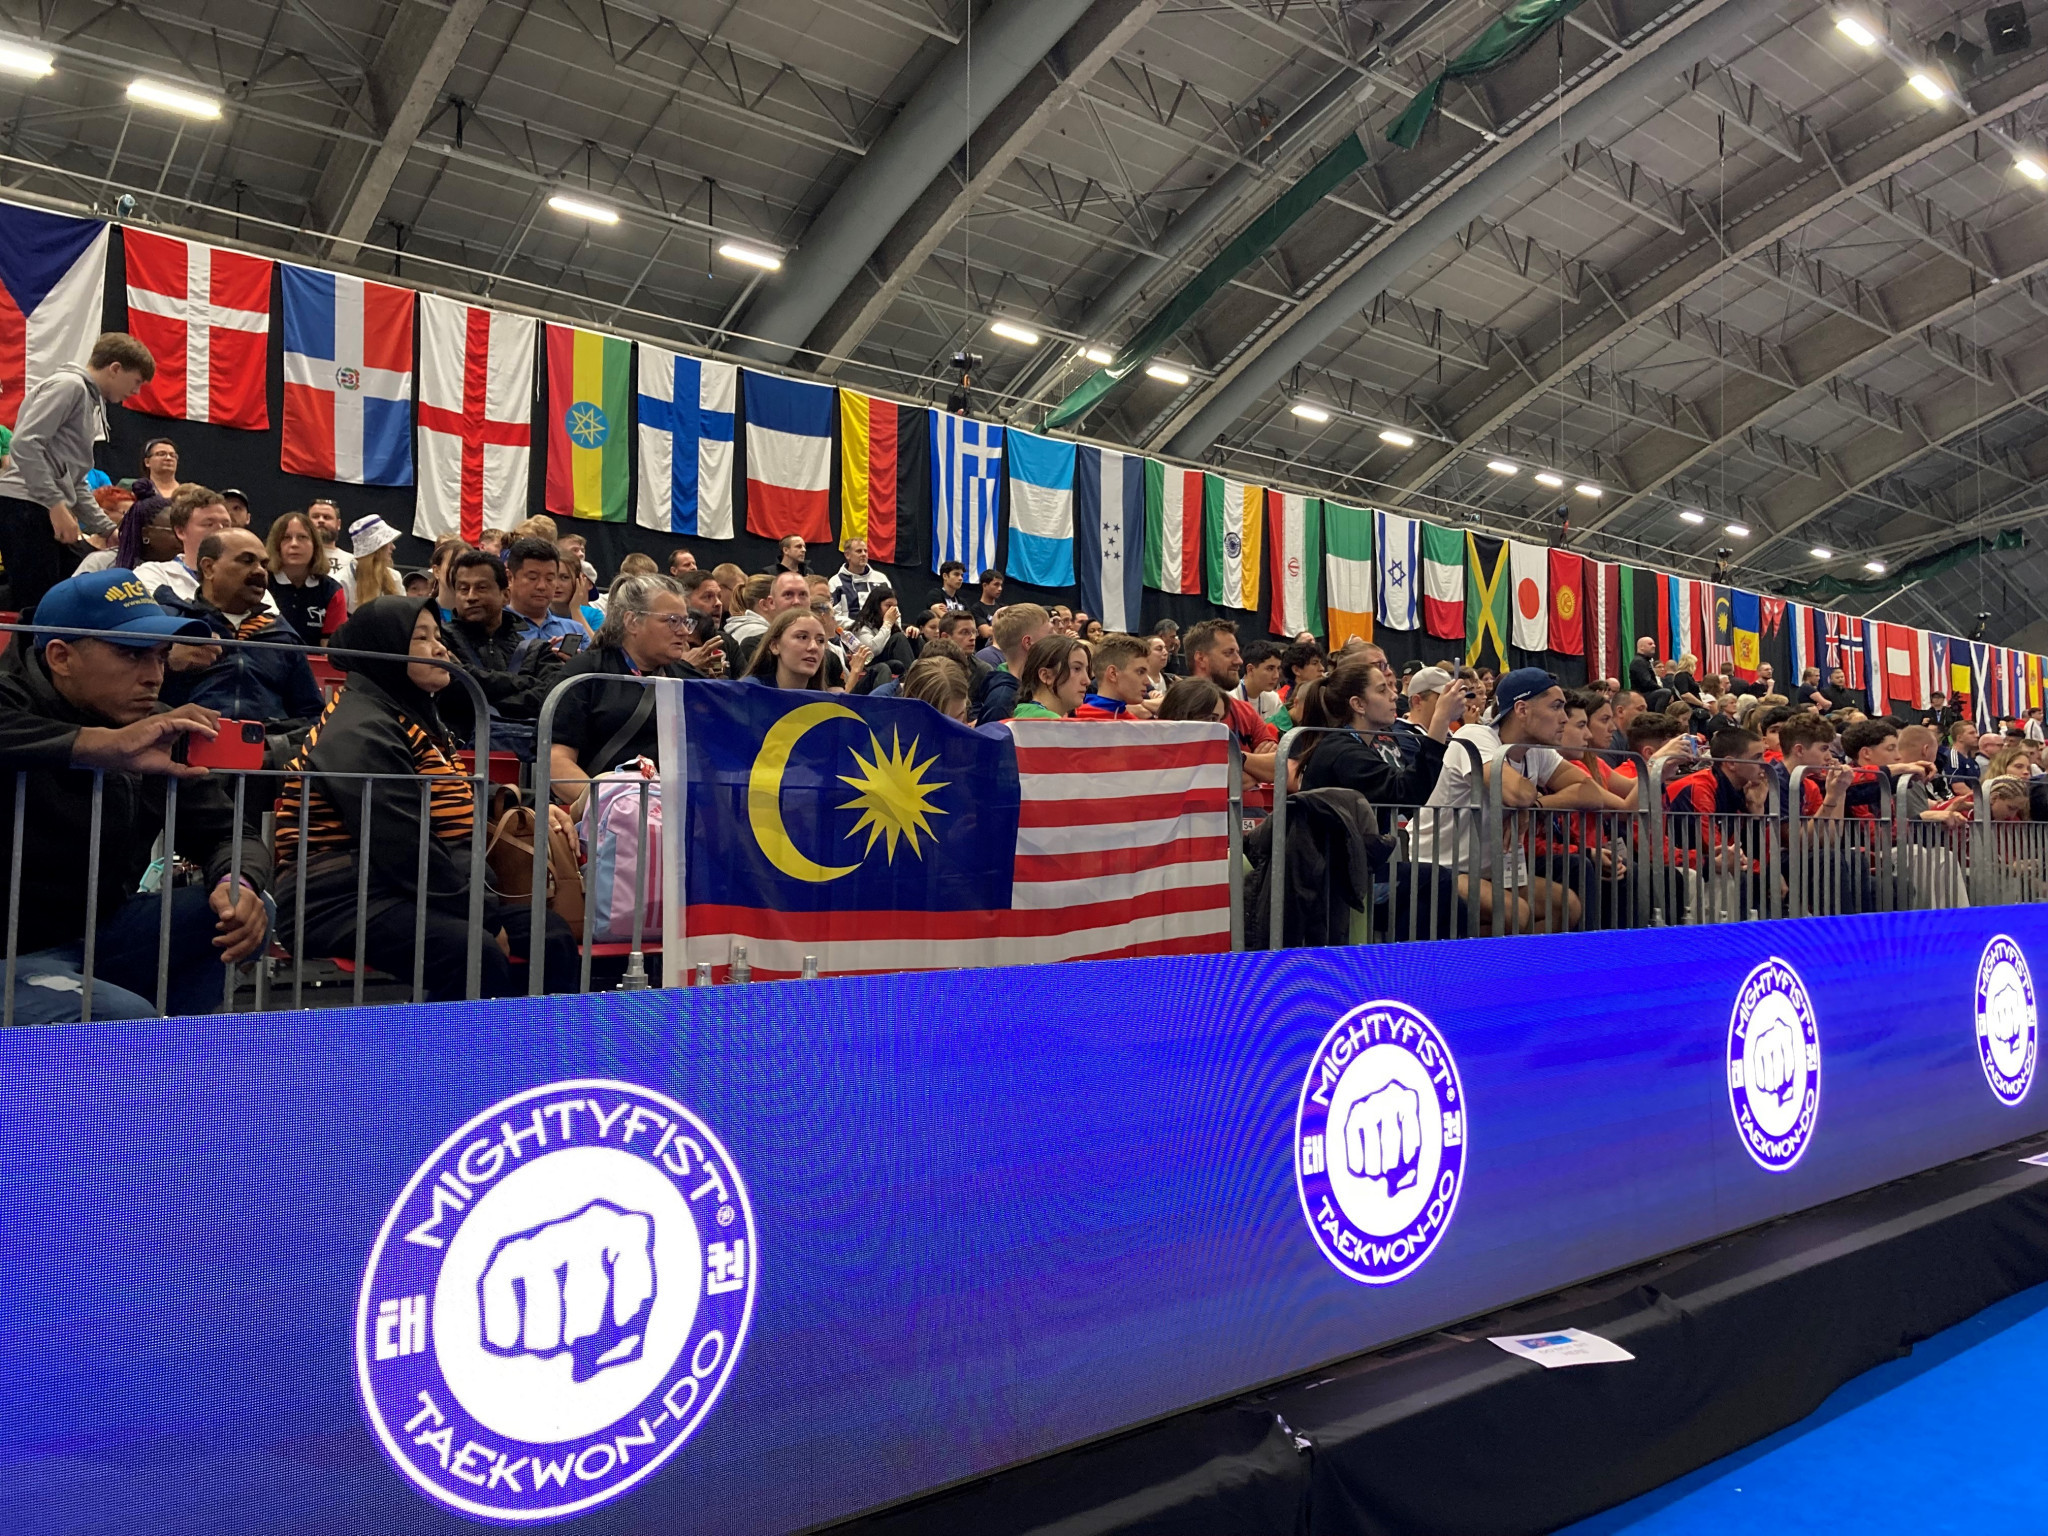 Teams continue to be well-backed from the stands at the ITF World Championships, with Malaysia among those with vocal supporters ©ITG